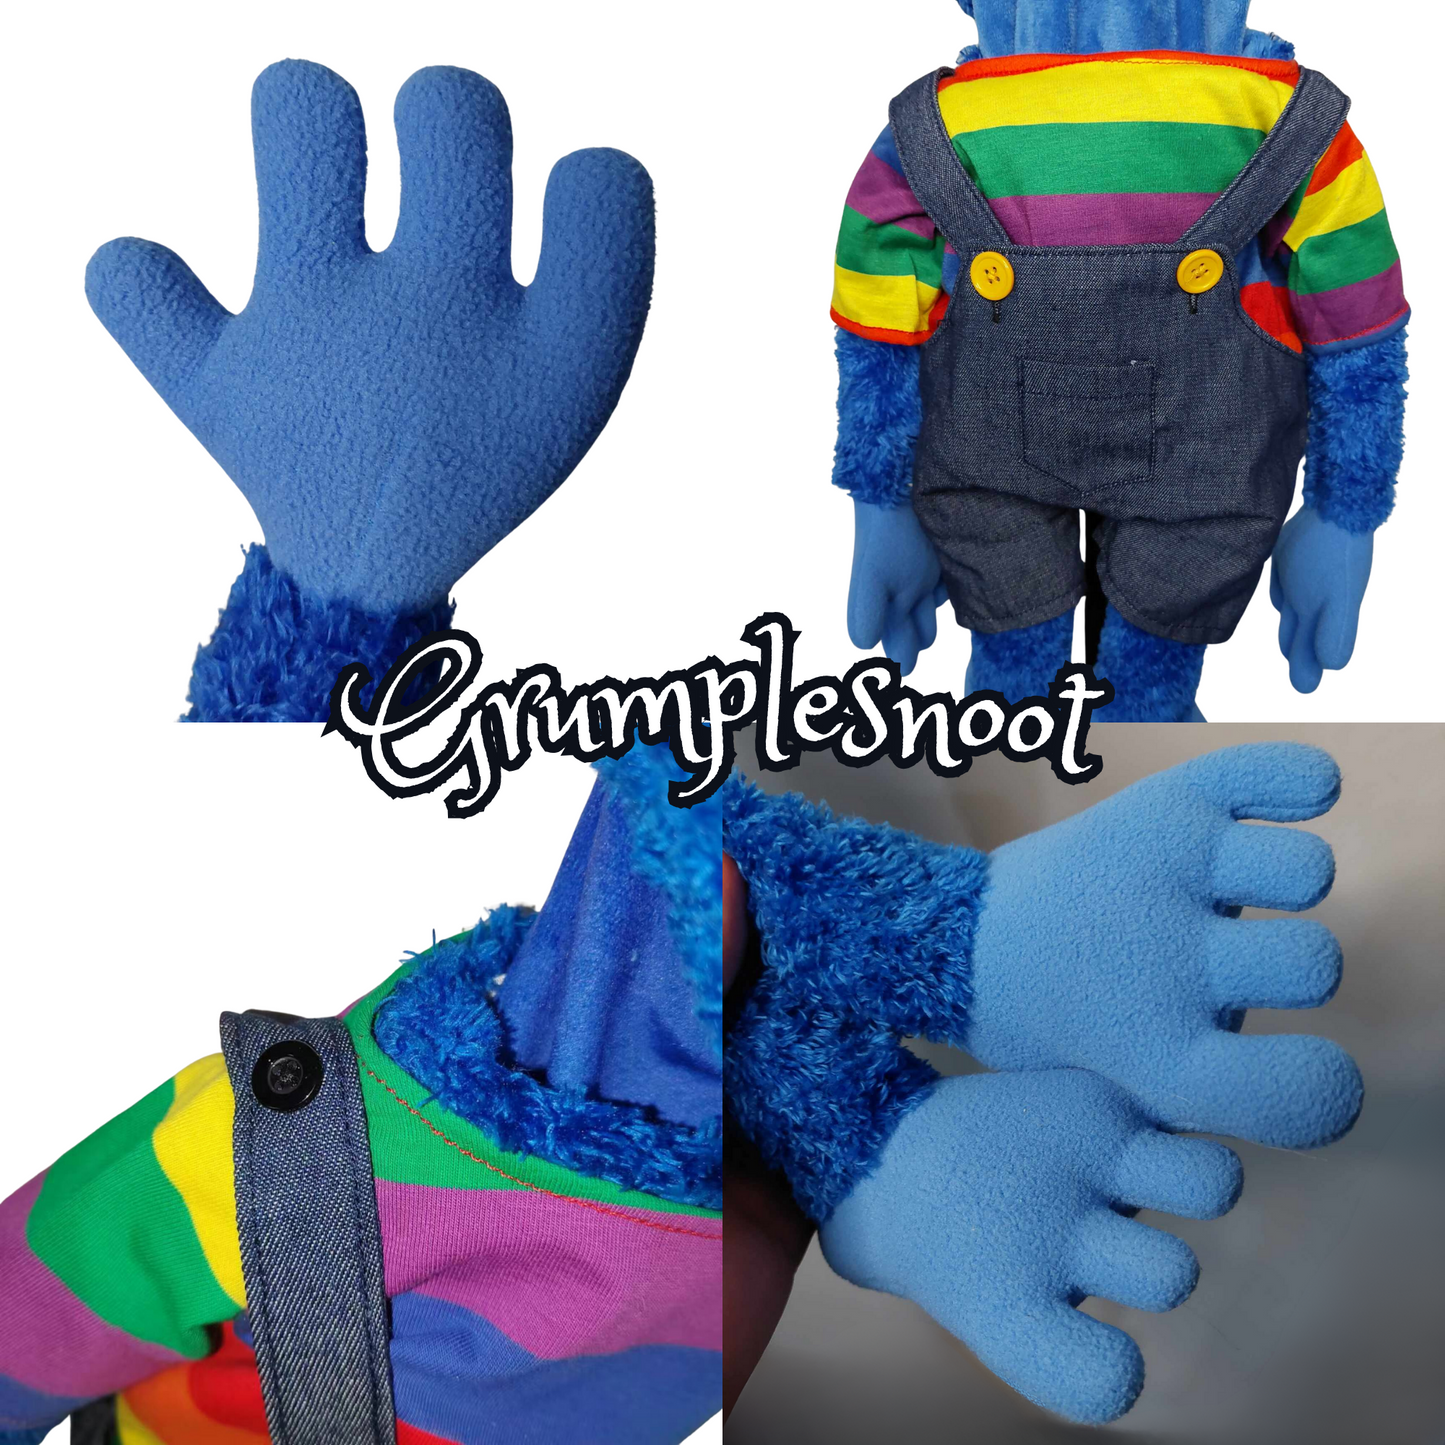 Pubbet 11: 'Grumplesnoot' 23" Full Body Furry Monster Hand Puppet Set CLEARANCE SALE